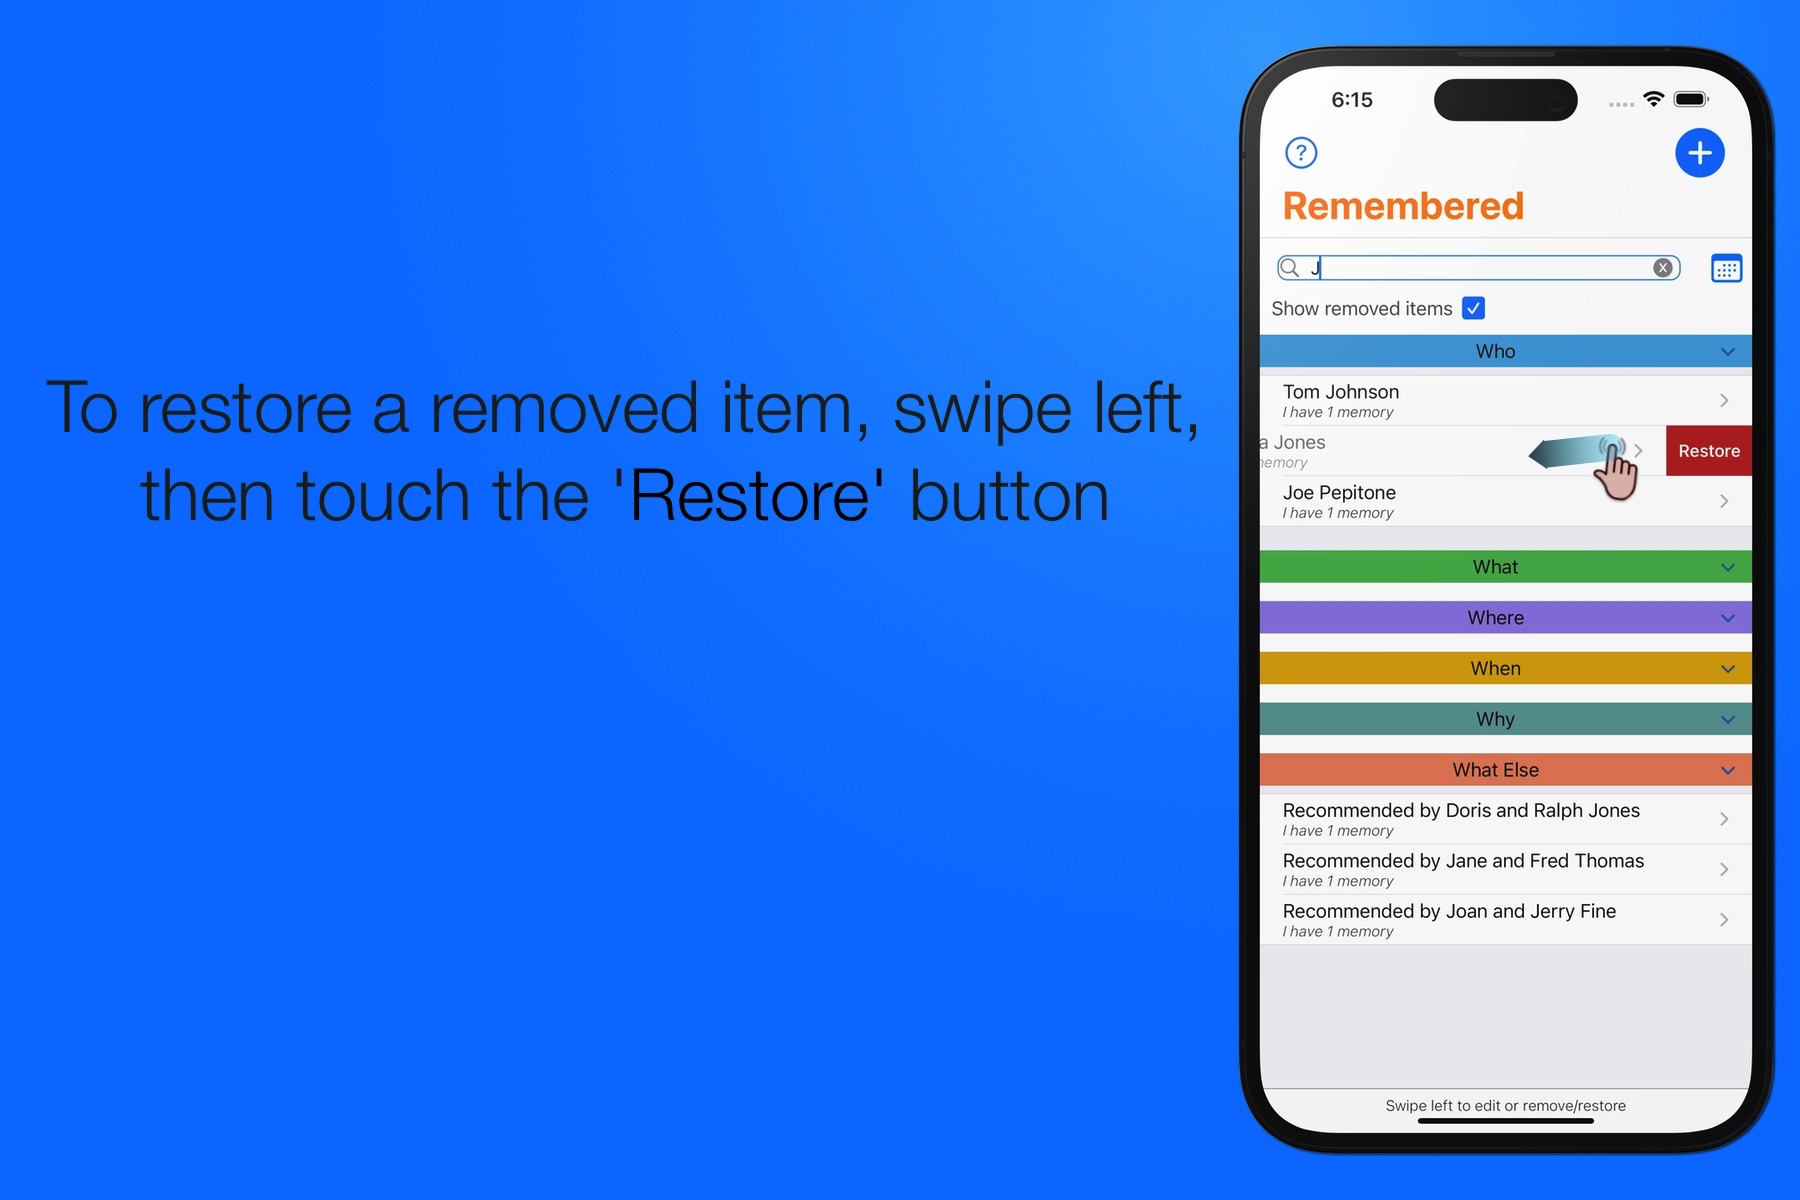 To restore a removed item, swipe left, then touch the Restore button.